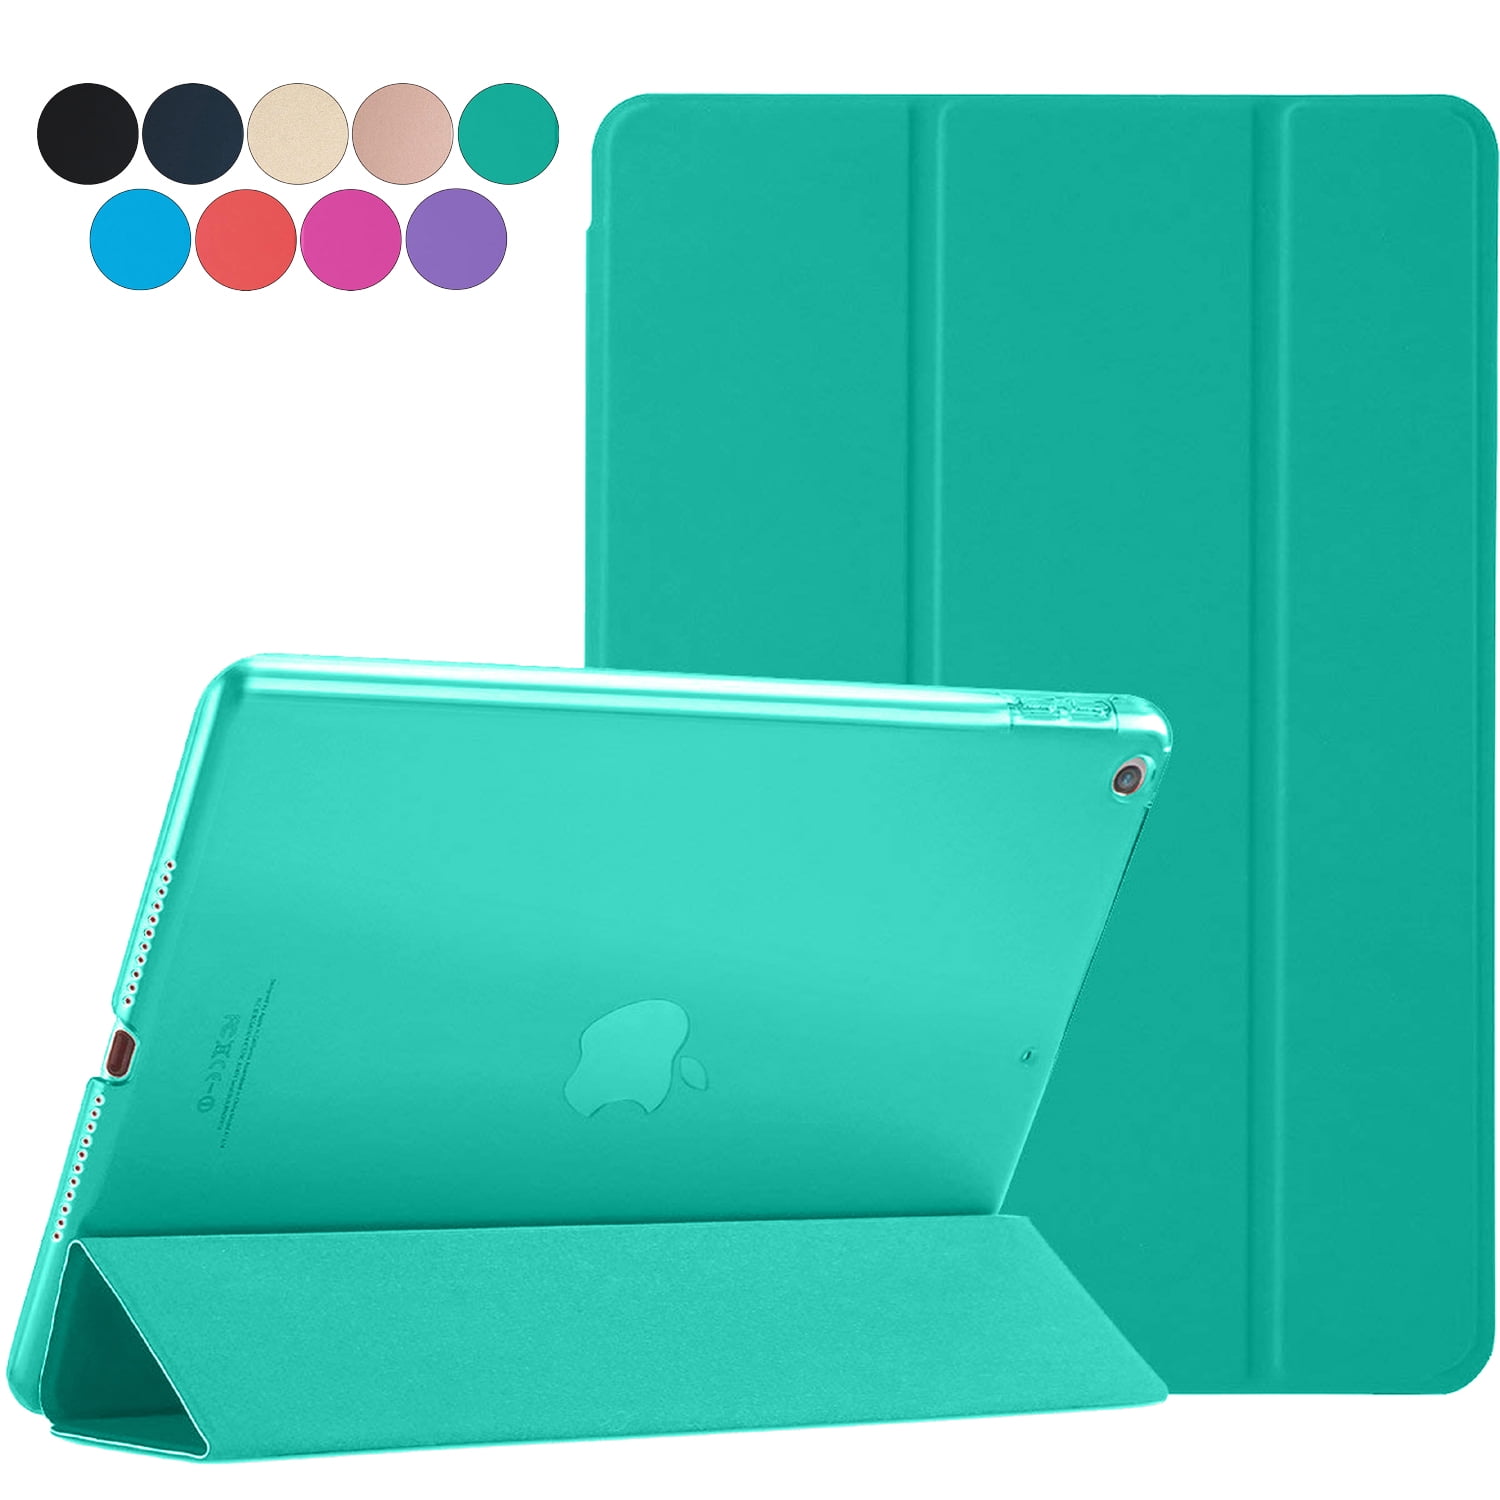 DuraSafe Case for iPad Mini 4 - 7.9 inch 2015 [ A1538 A1550 ] Tri Fold Smart Cover with Translucent Back, Auto Sleep/Wake - Green